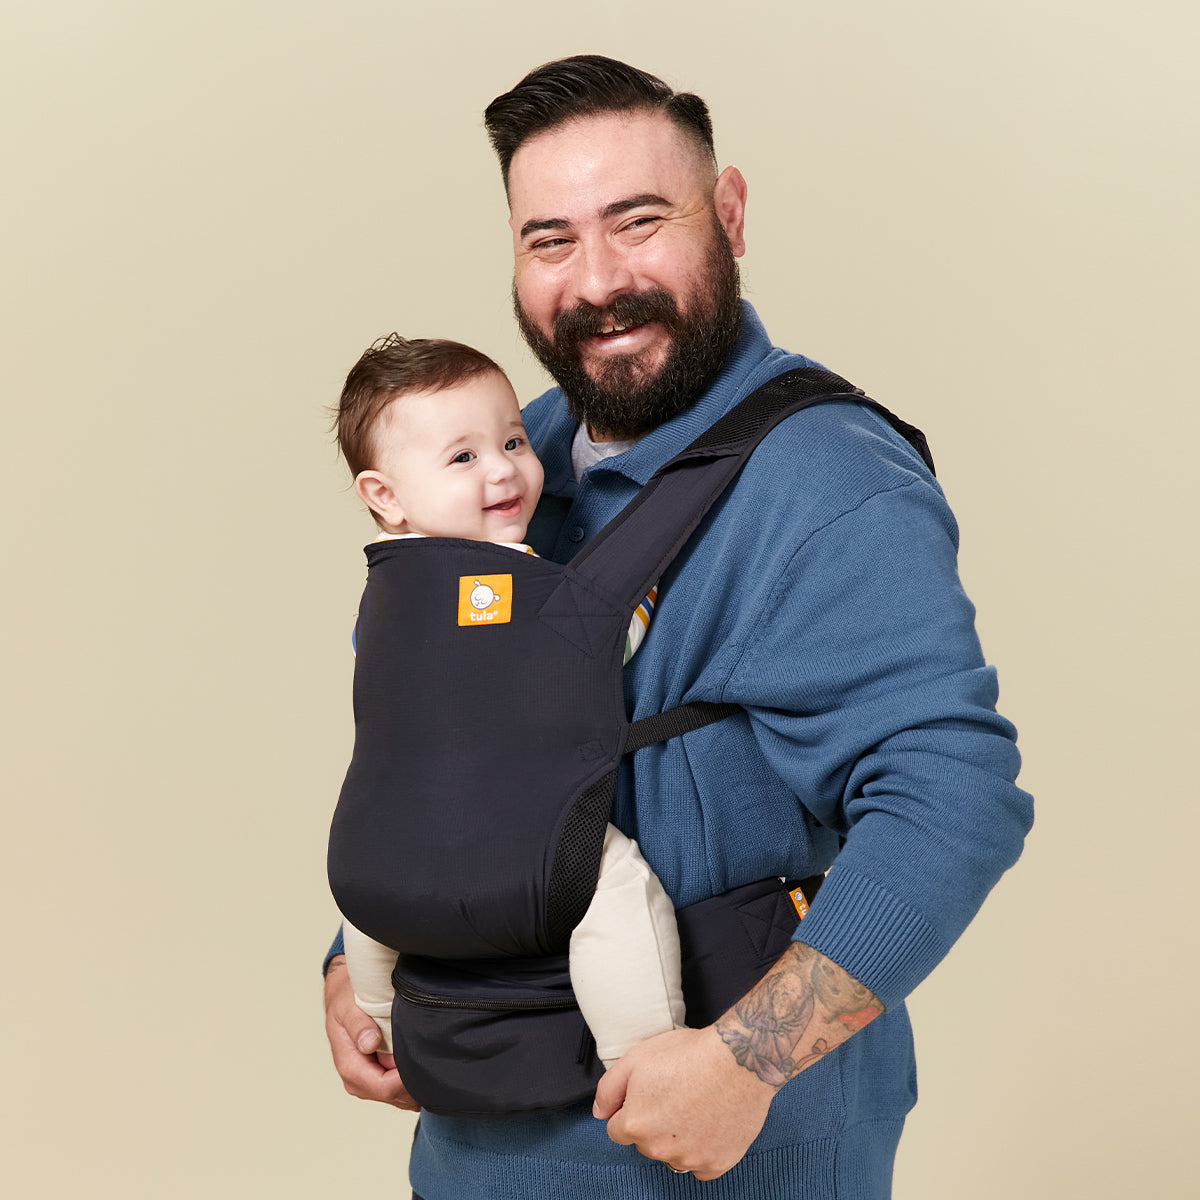 Happy dad with his child in Tula Lite carrier in inward facing position